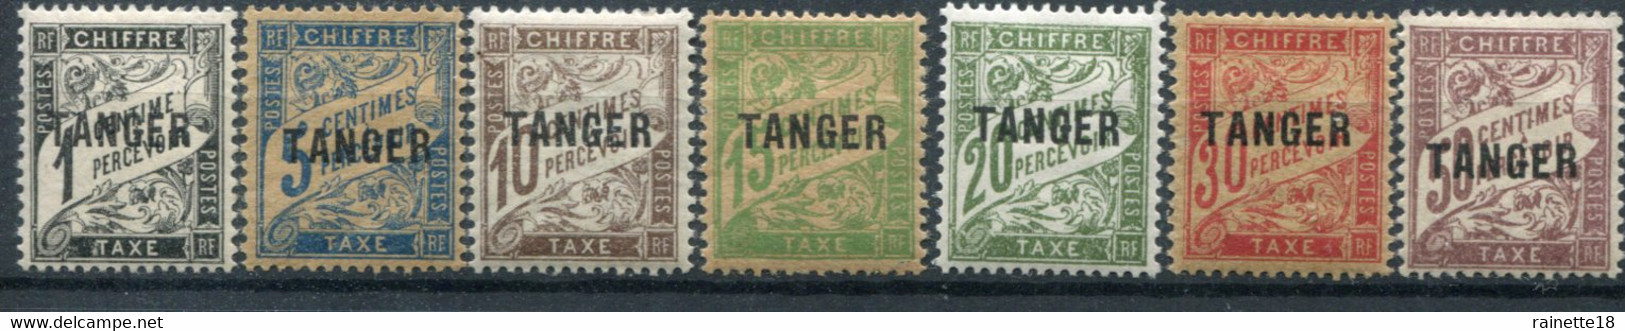 Maroc           Taxes       35/41 * - Postage Due